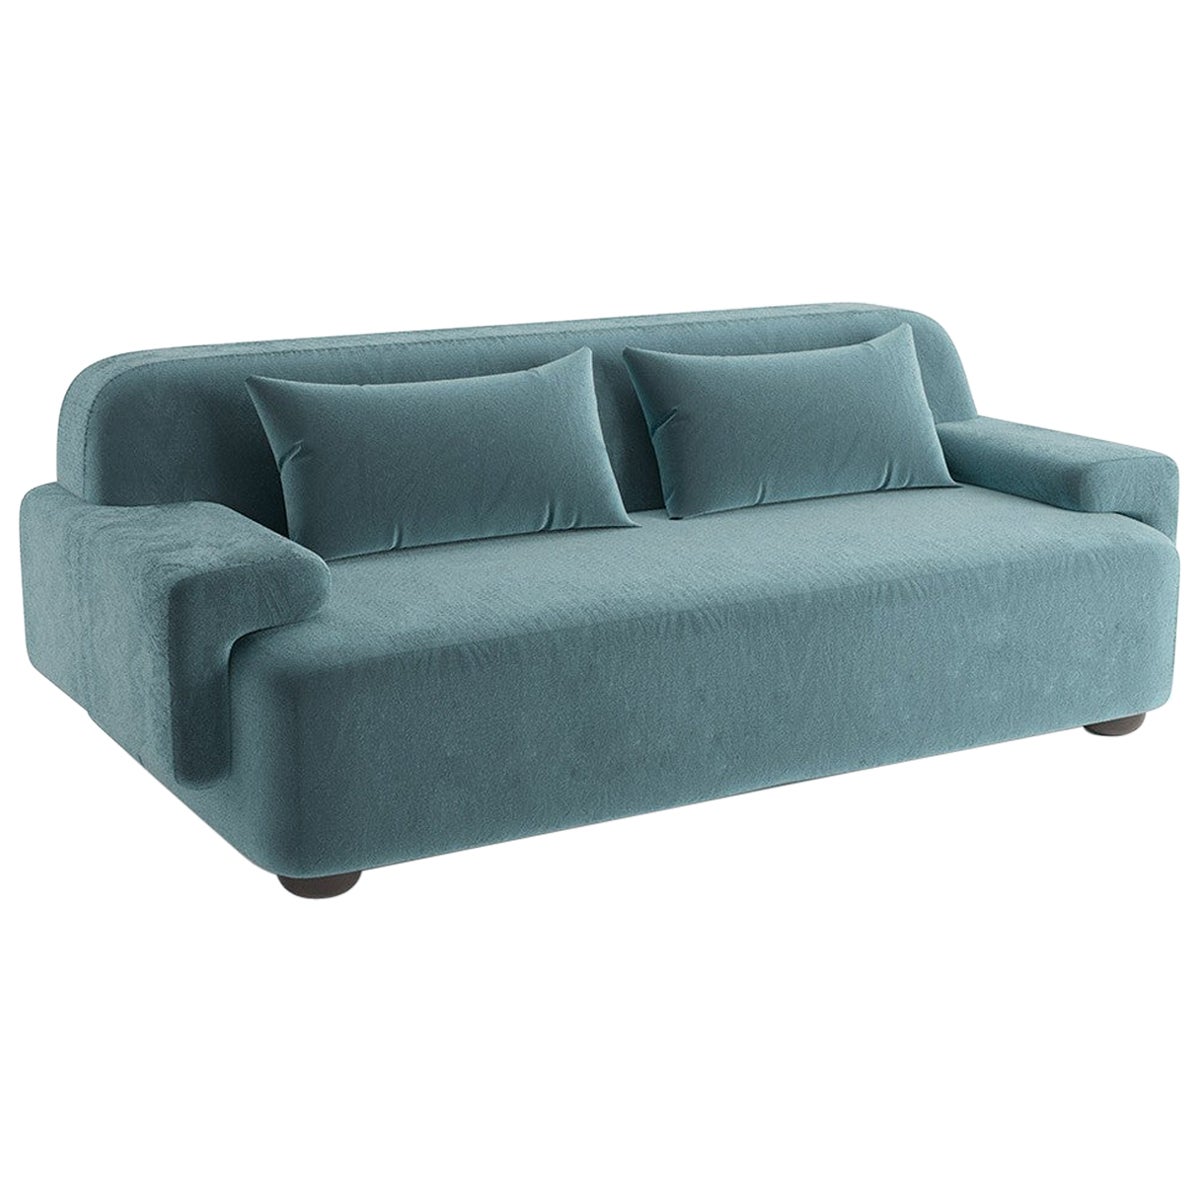 Popus Editions Lena 4 Seater Sofa in Blue Verone Velvet Upholstery For Sale